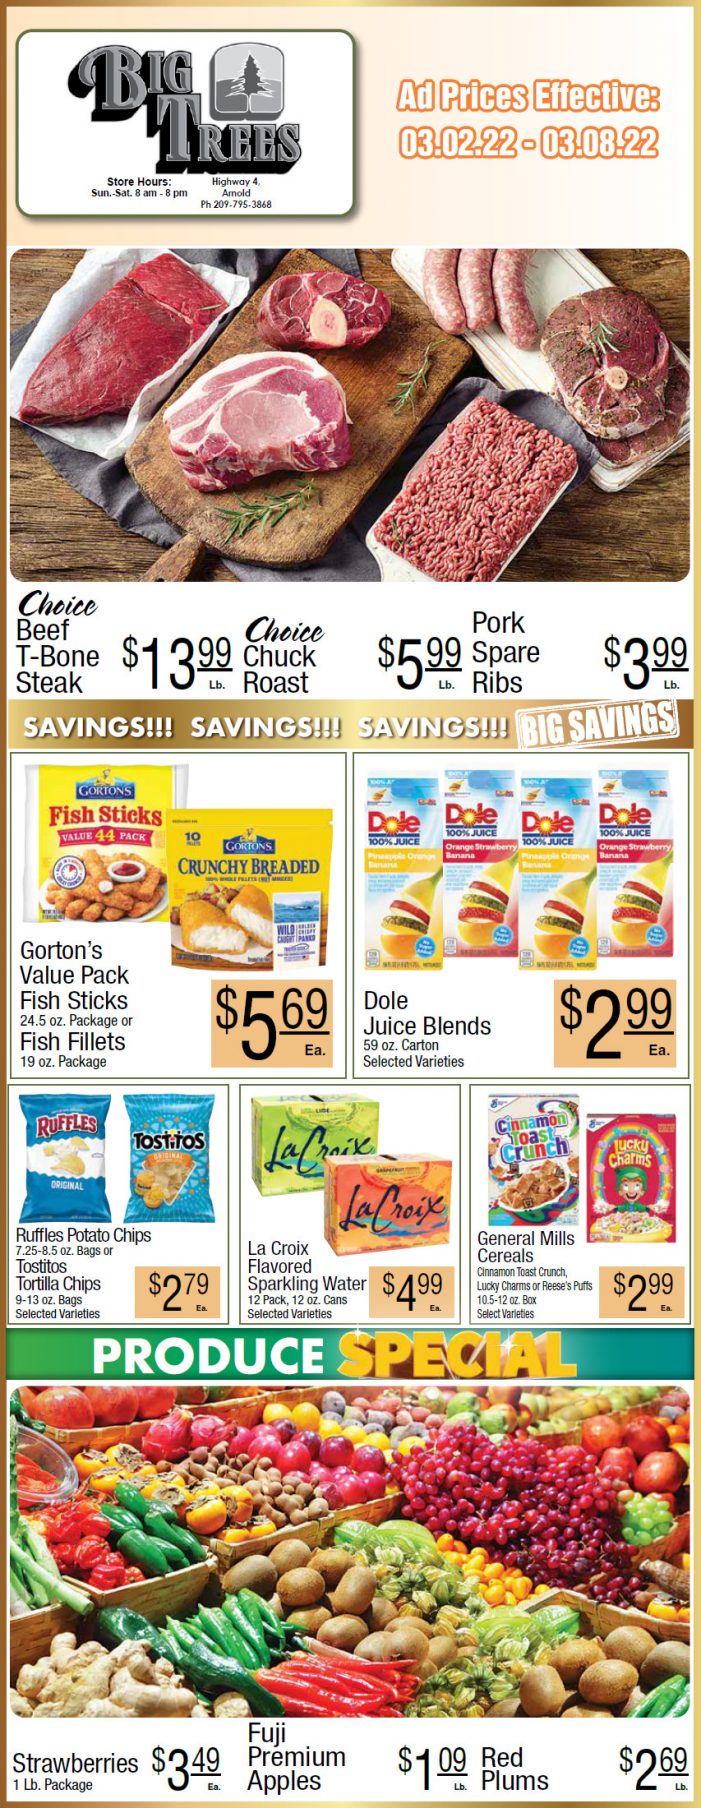 Big Trees Market Weekly Ad & Grocery Specials March 2nd Through March 8th! Shop Local & Save!